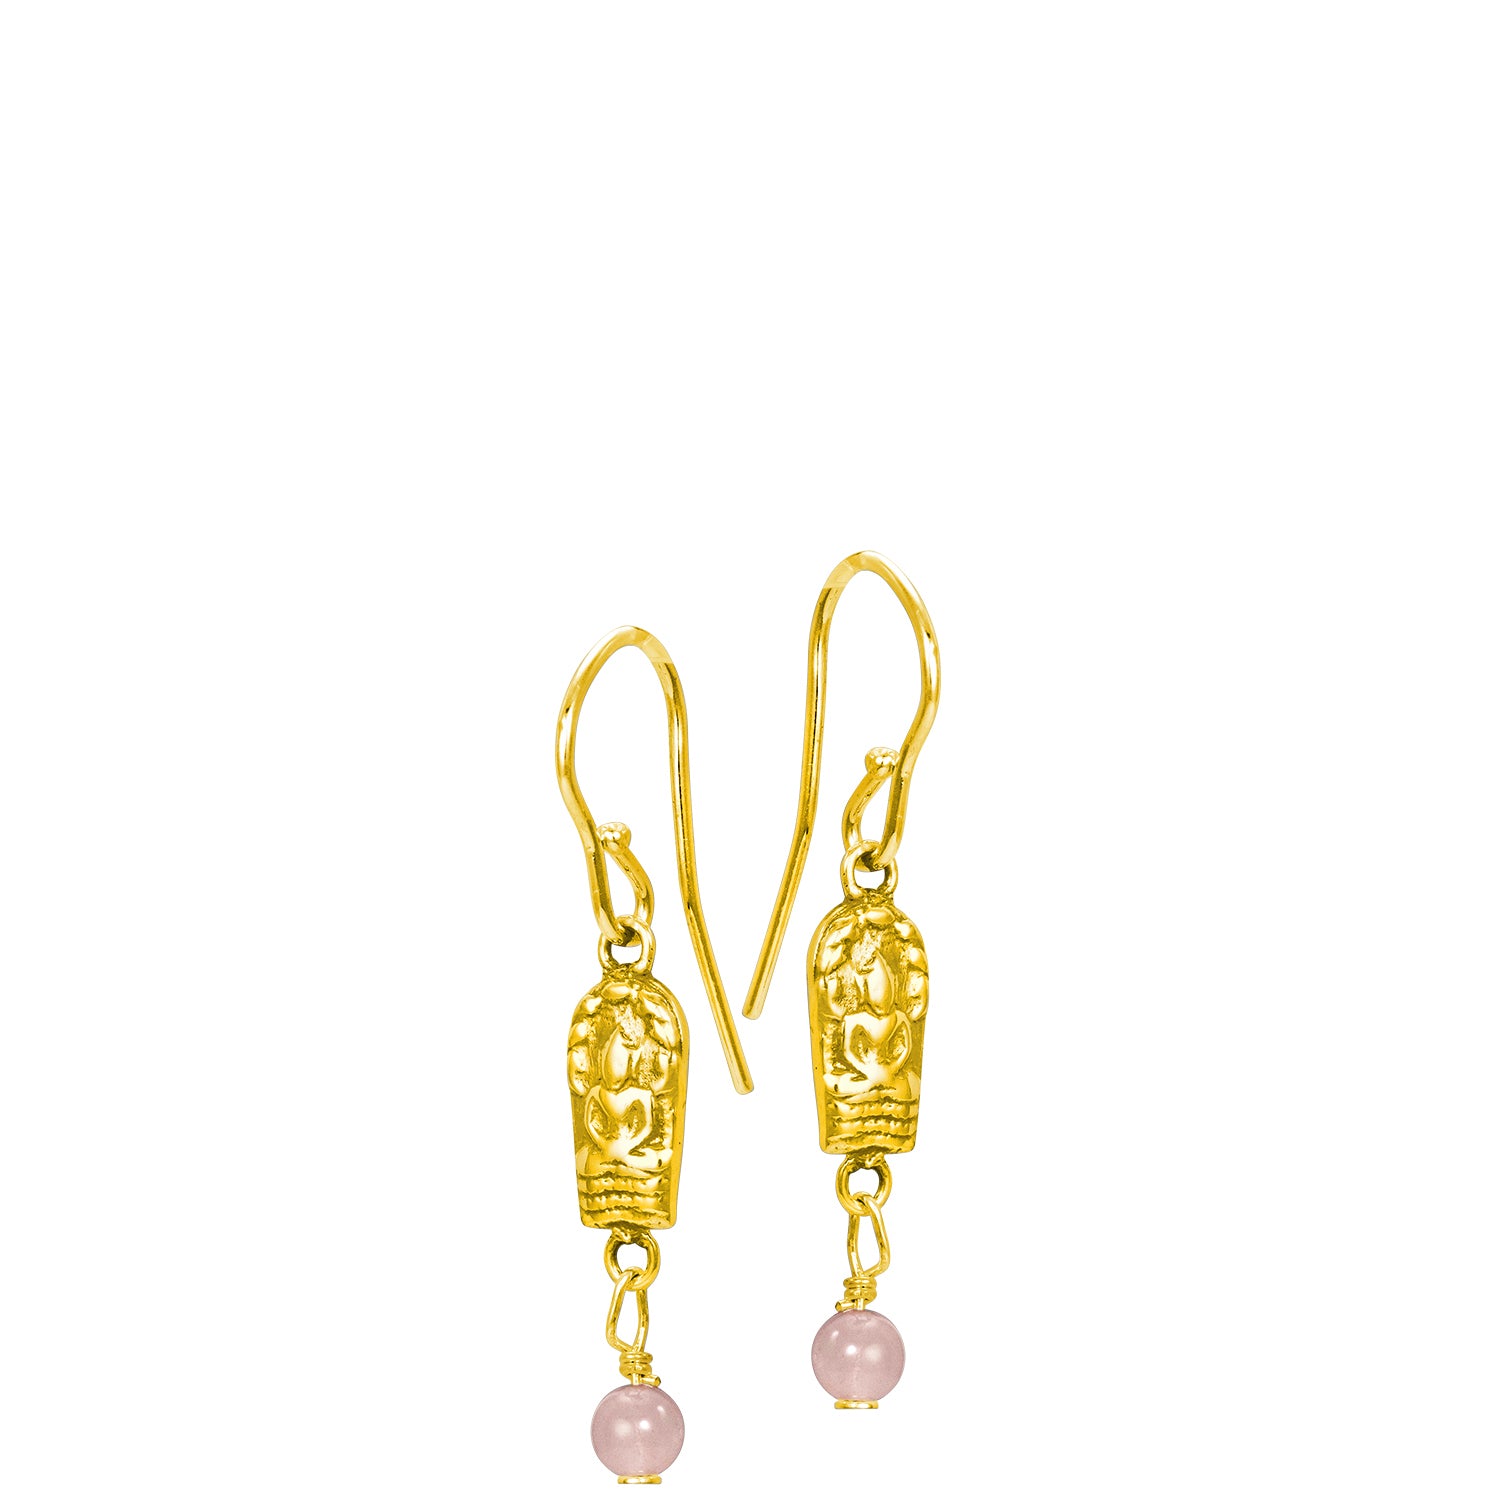 Buddha earrings with rose quartz and gold plated mini pendant by ETERNAL BLISS - Spiritual jewelry